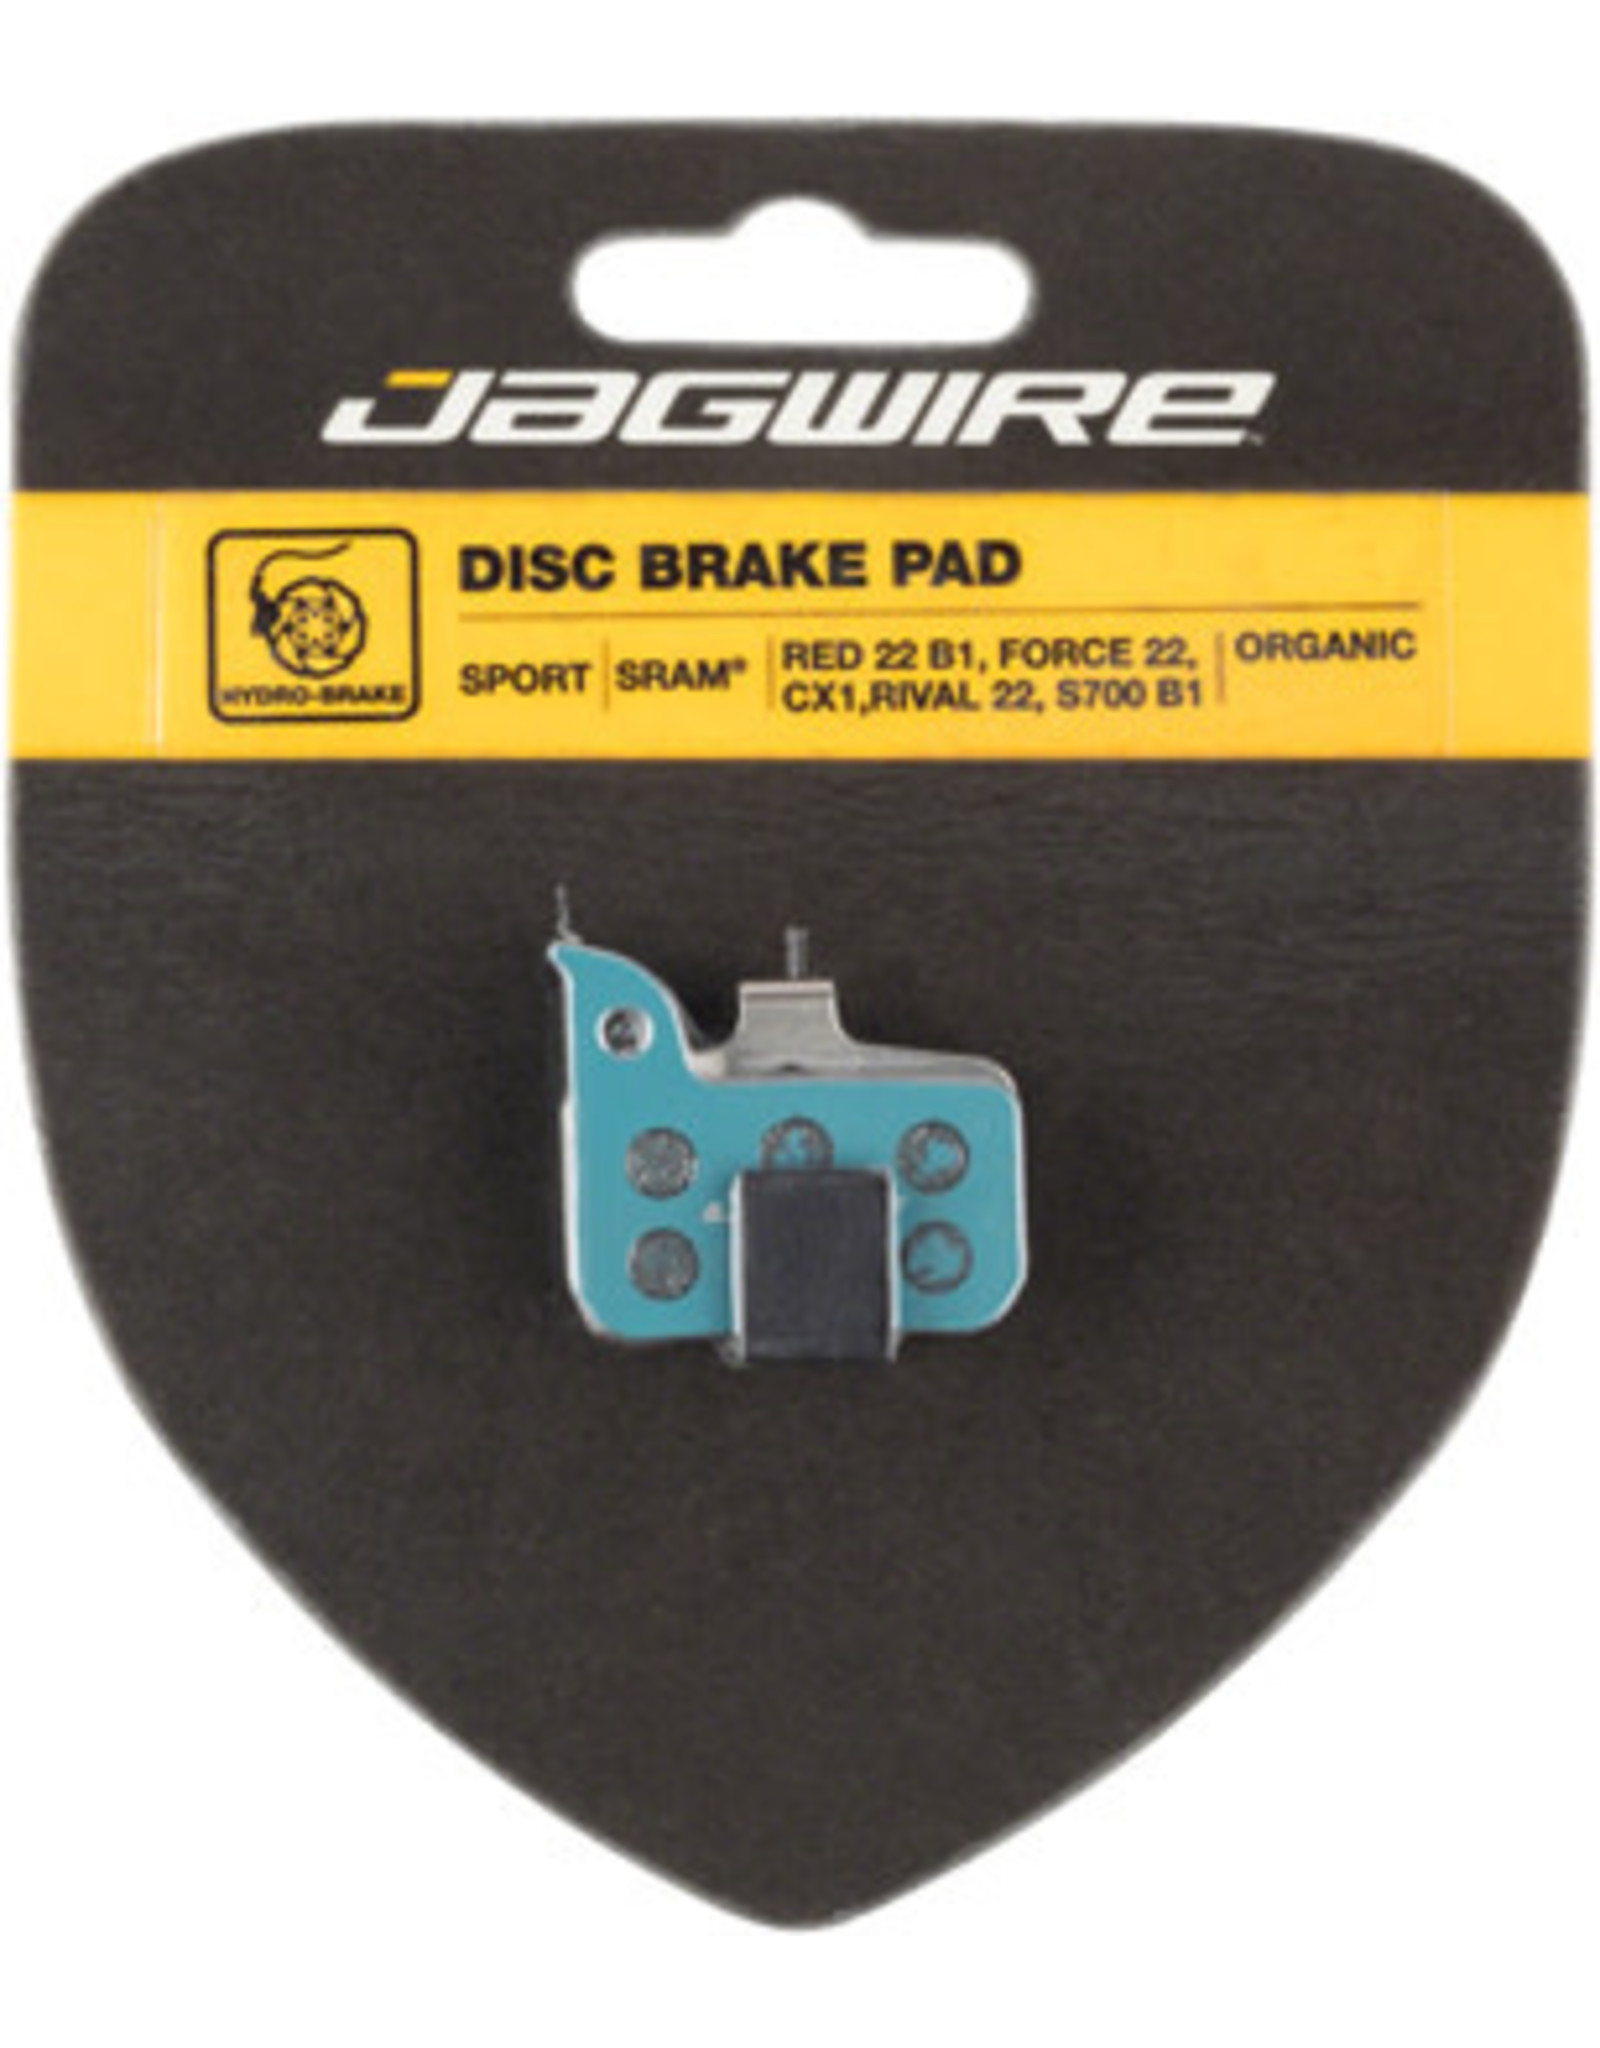 JAGWIRE Jagwire Sport Organic Disc Brake Pads for SRAM Red 22 B1, Force 22, CX1, Rival 22, S700 B1, Level Ultimate